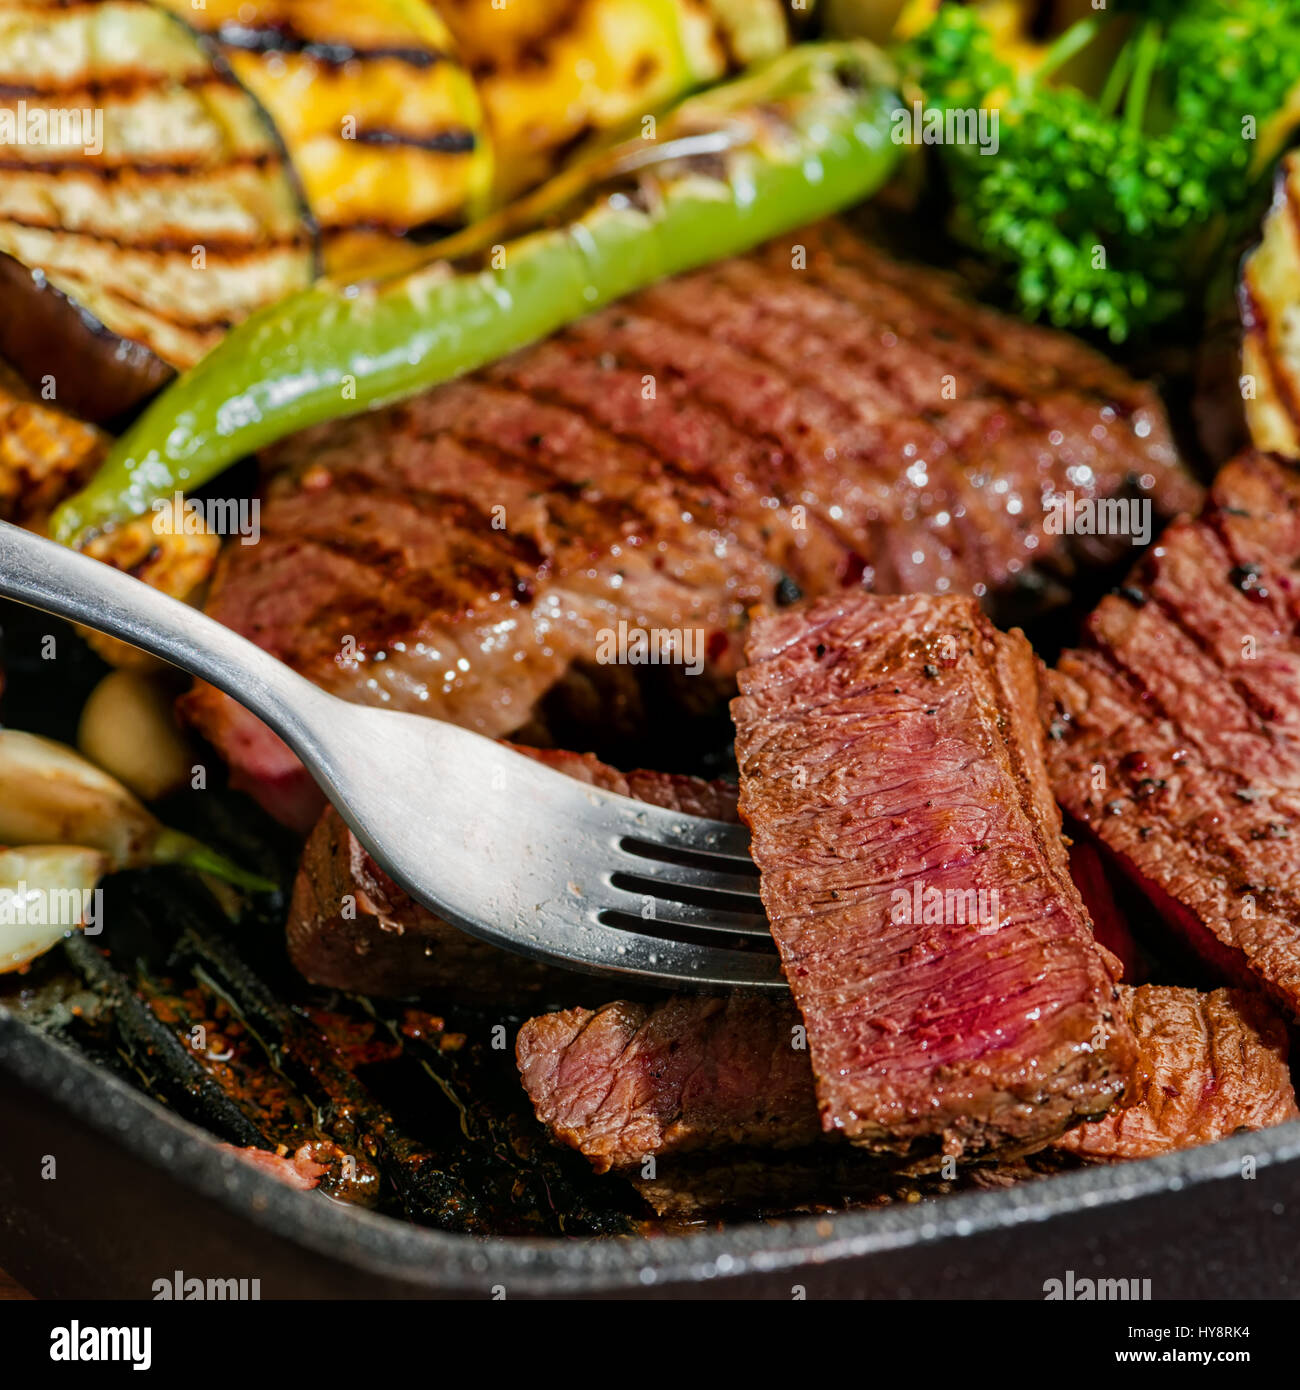 slicing delicious roasted meat on fork with vegetable,  healthy lifestyle Stock Photo